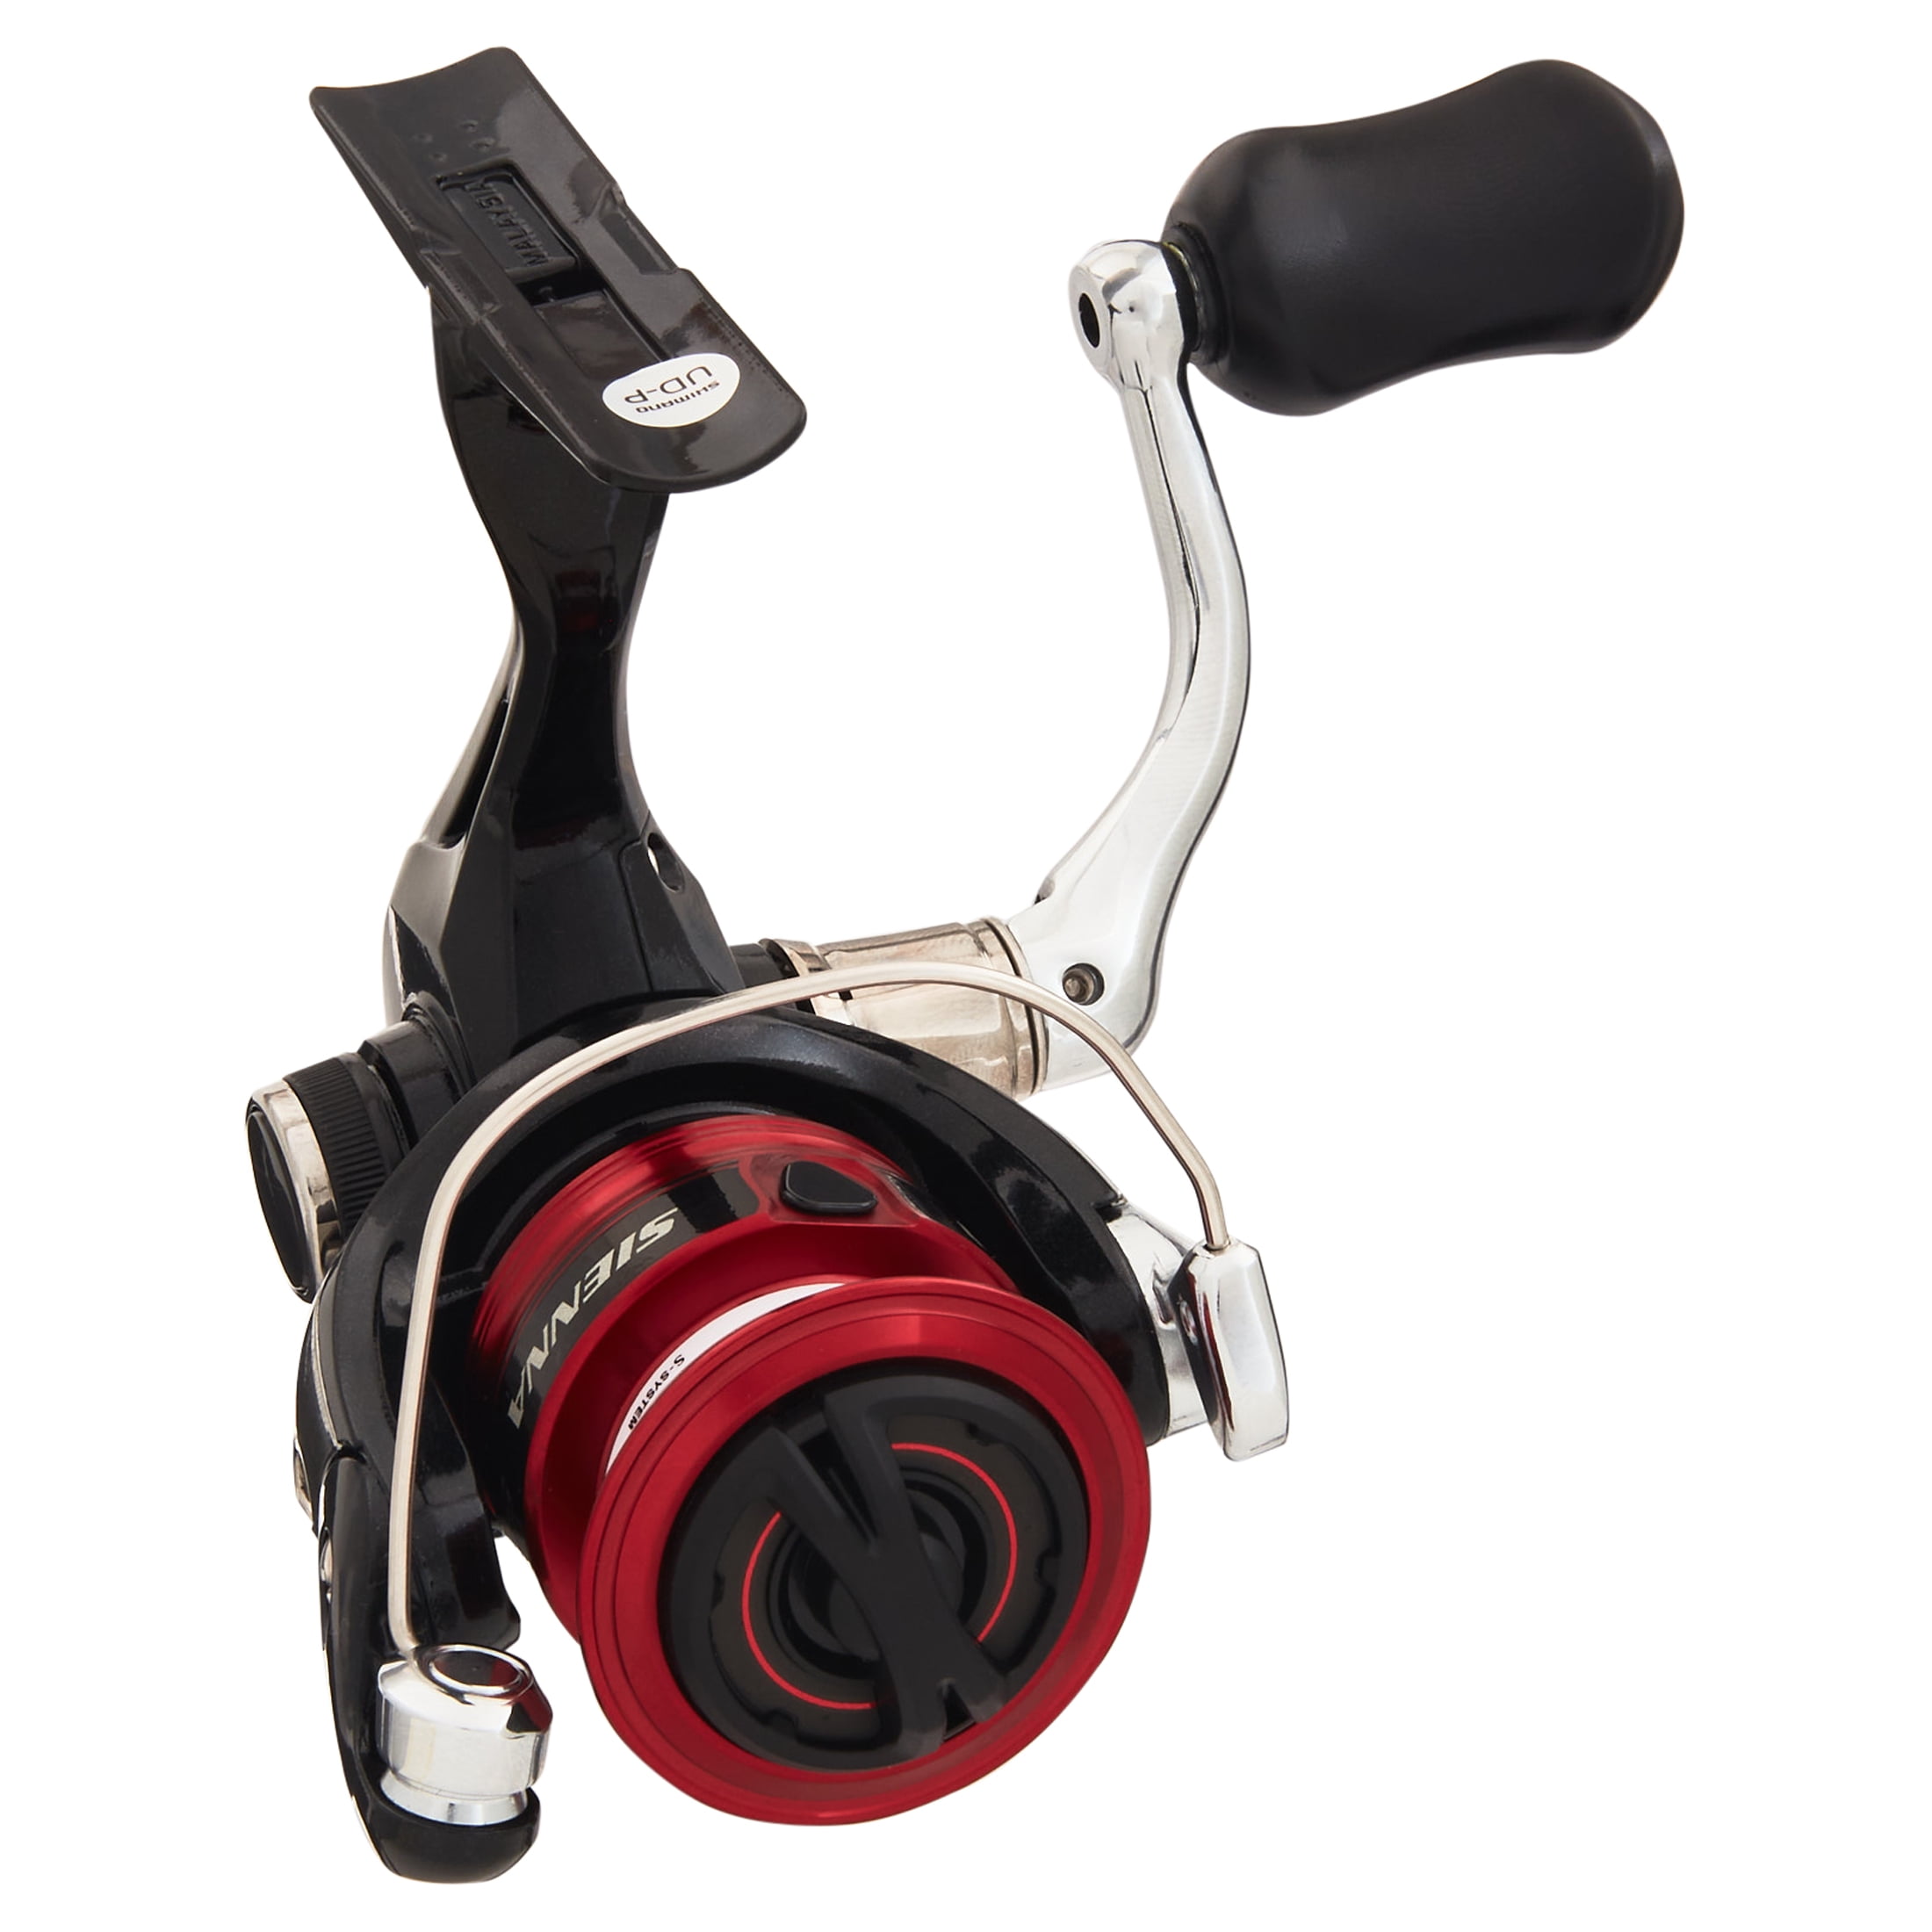 Shimano Sienna 1000 RE, Carphunter&Co Shop, The Tackle Store